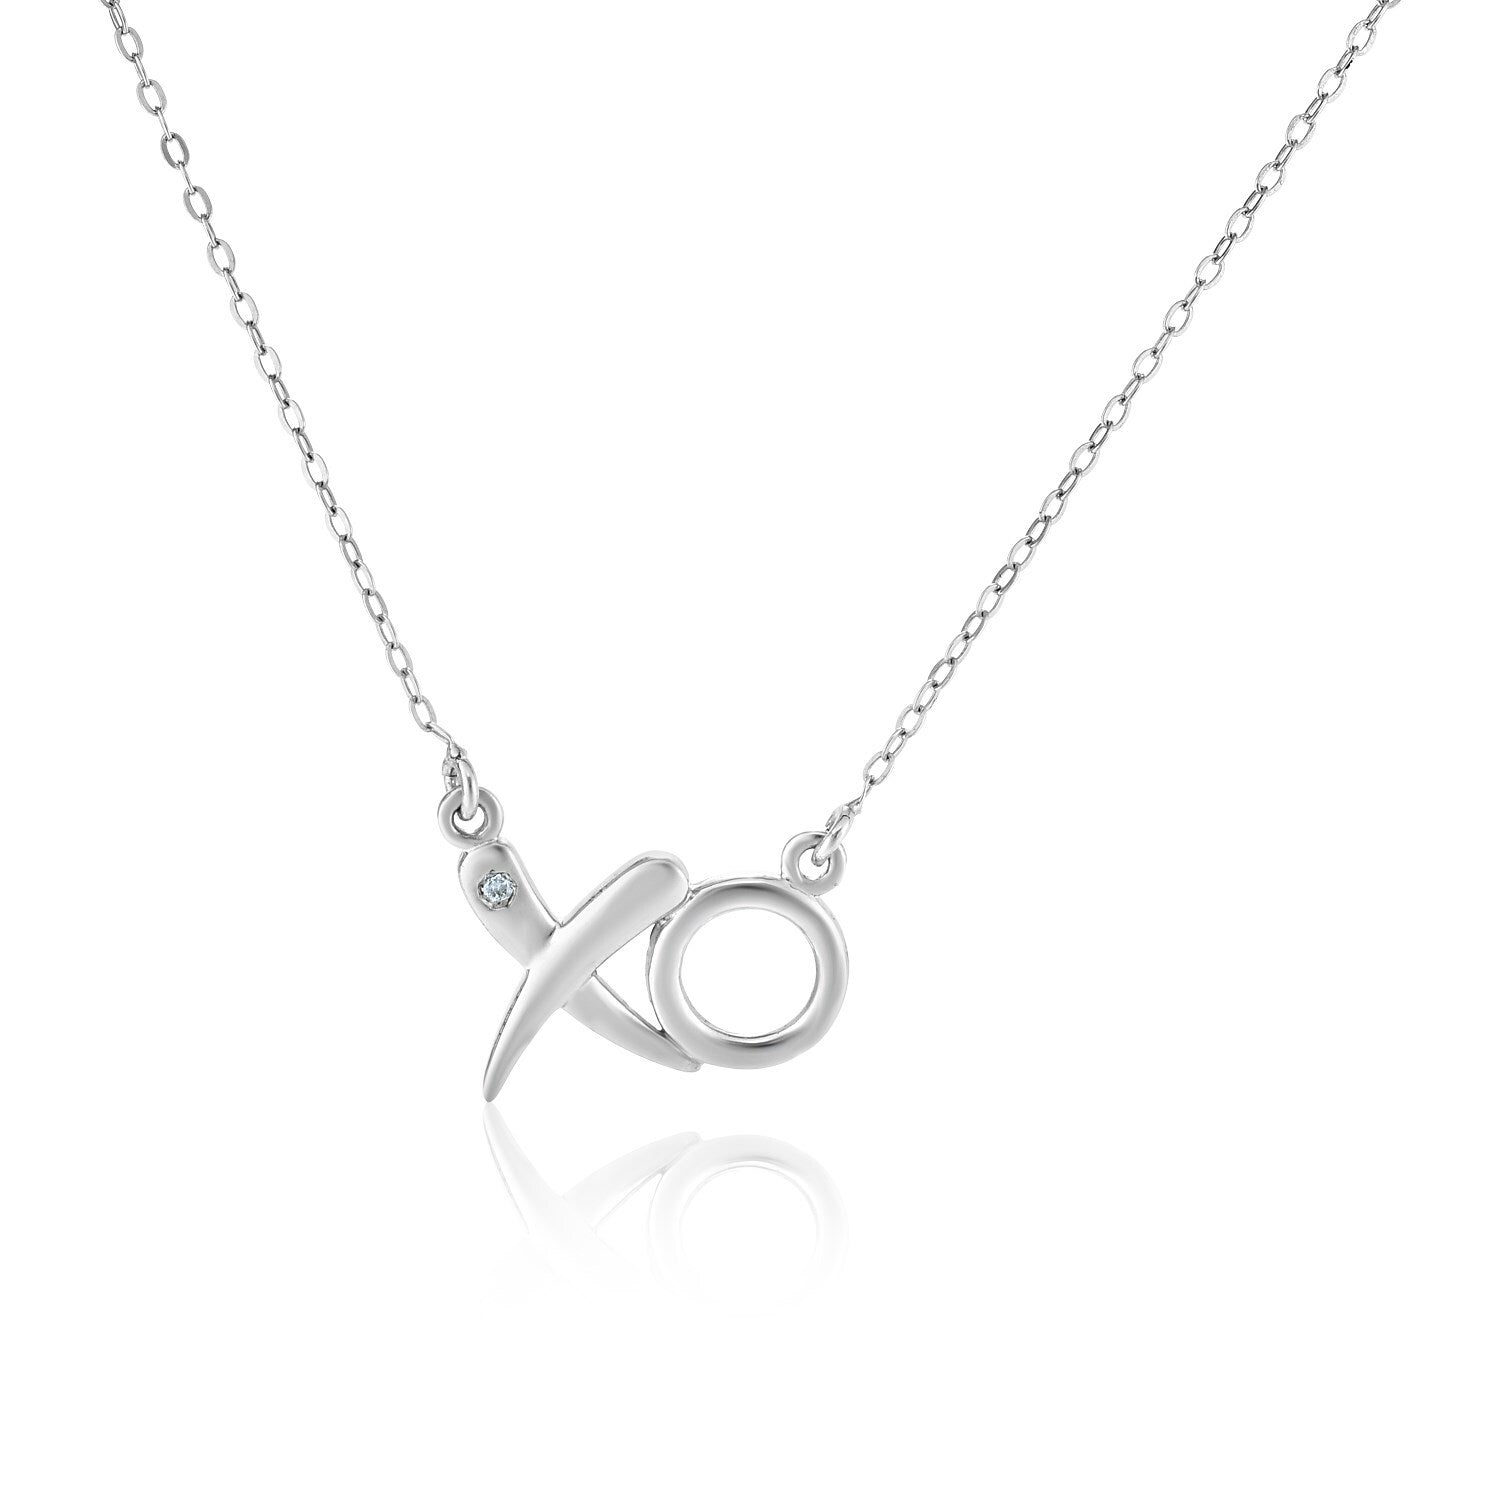 Sterling Silver 18 inch Necklace with XO Pendant with Diamond, size 18''